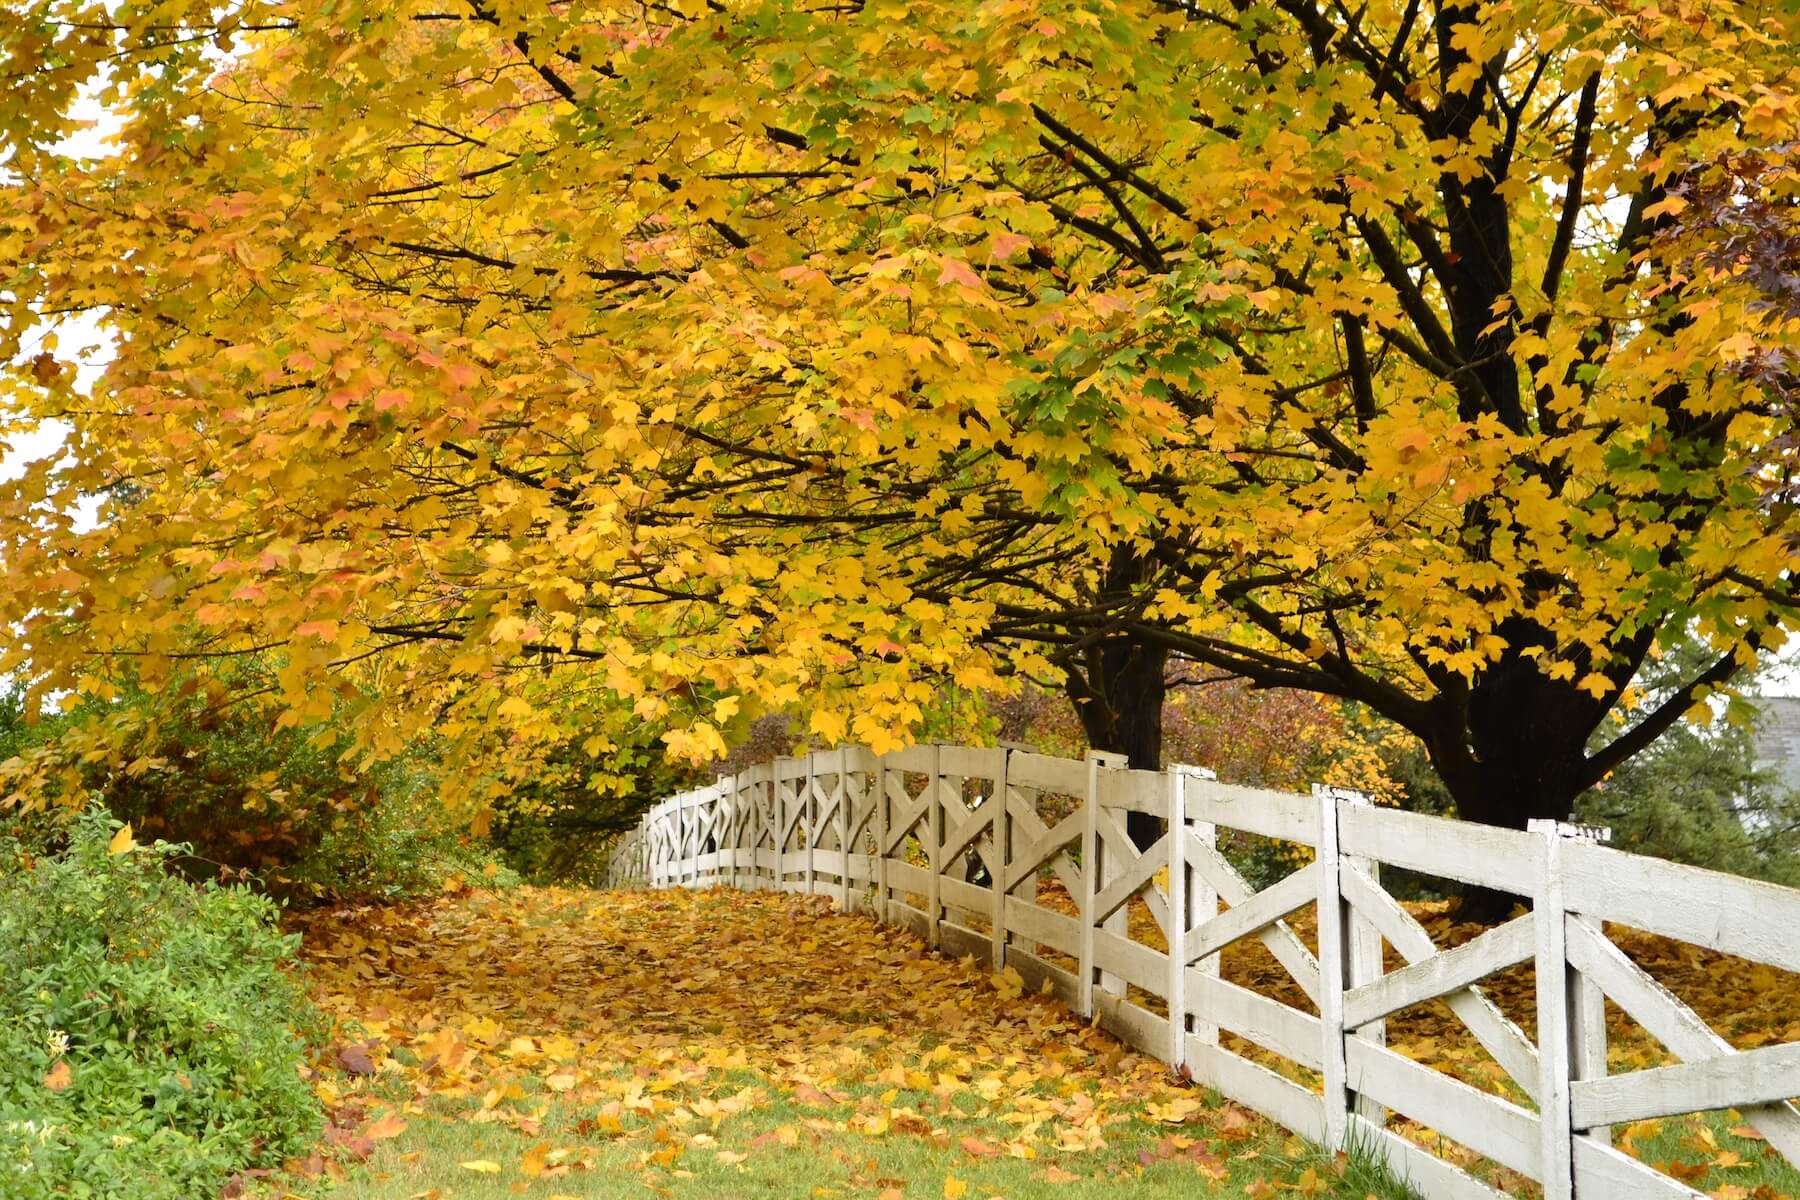 A white fence surrounded by trees with yellow leaves, changing season.